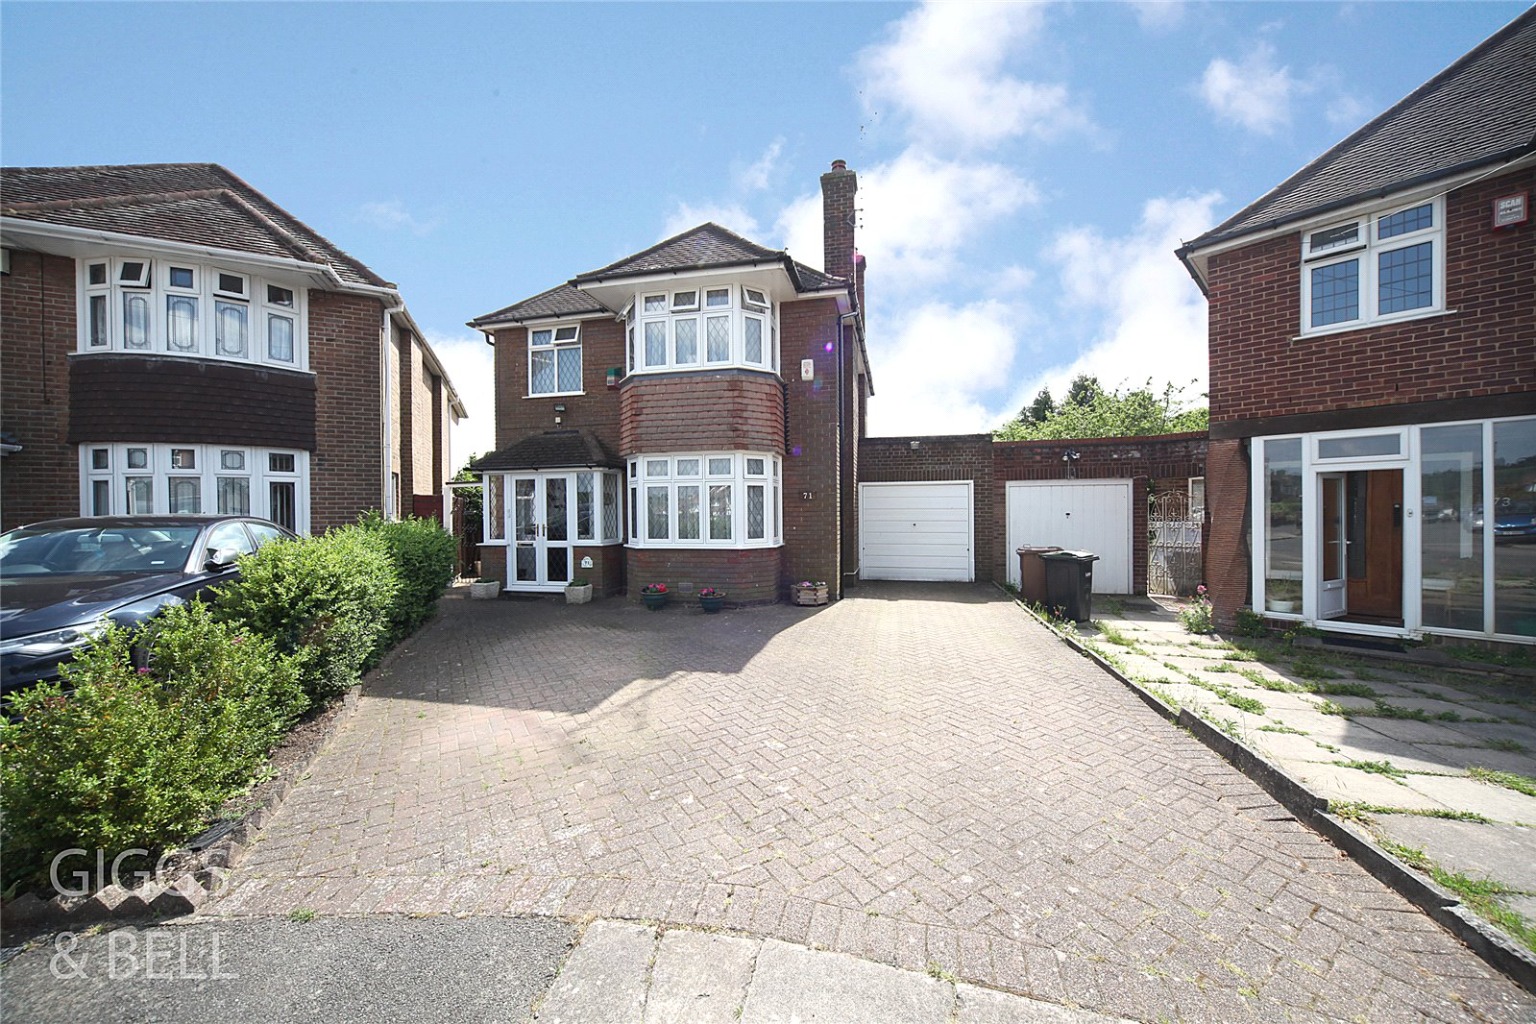 3 bed detached house for sale in Graham Gardens, Luton 22